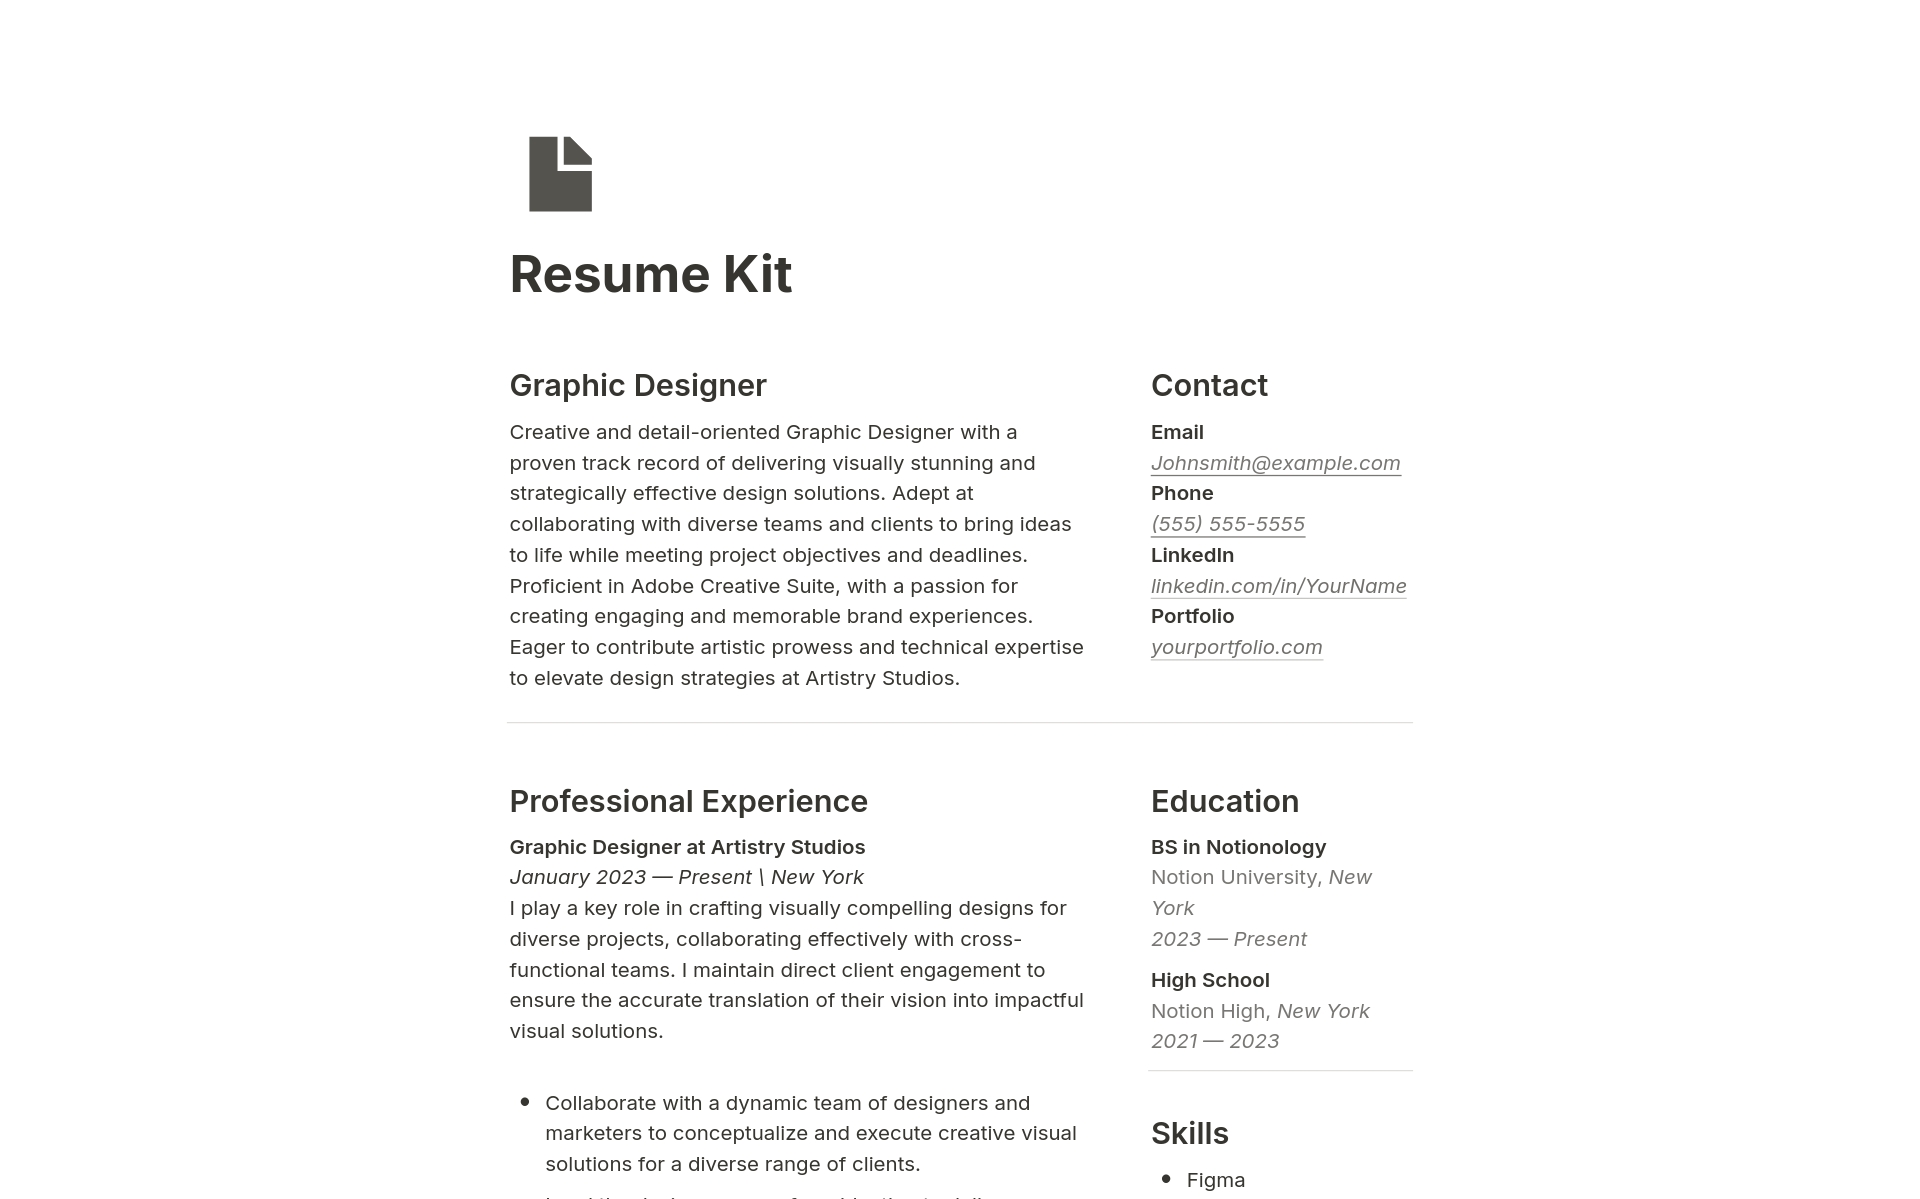 The Resume Kit is an all-in-one, advanced, and comprehensive resume toolkit with built-in resources and resume themes.